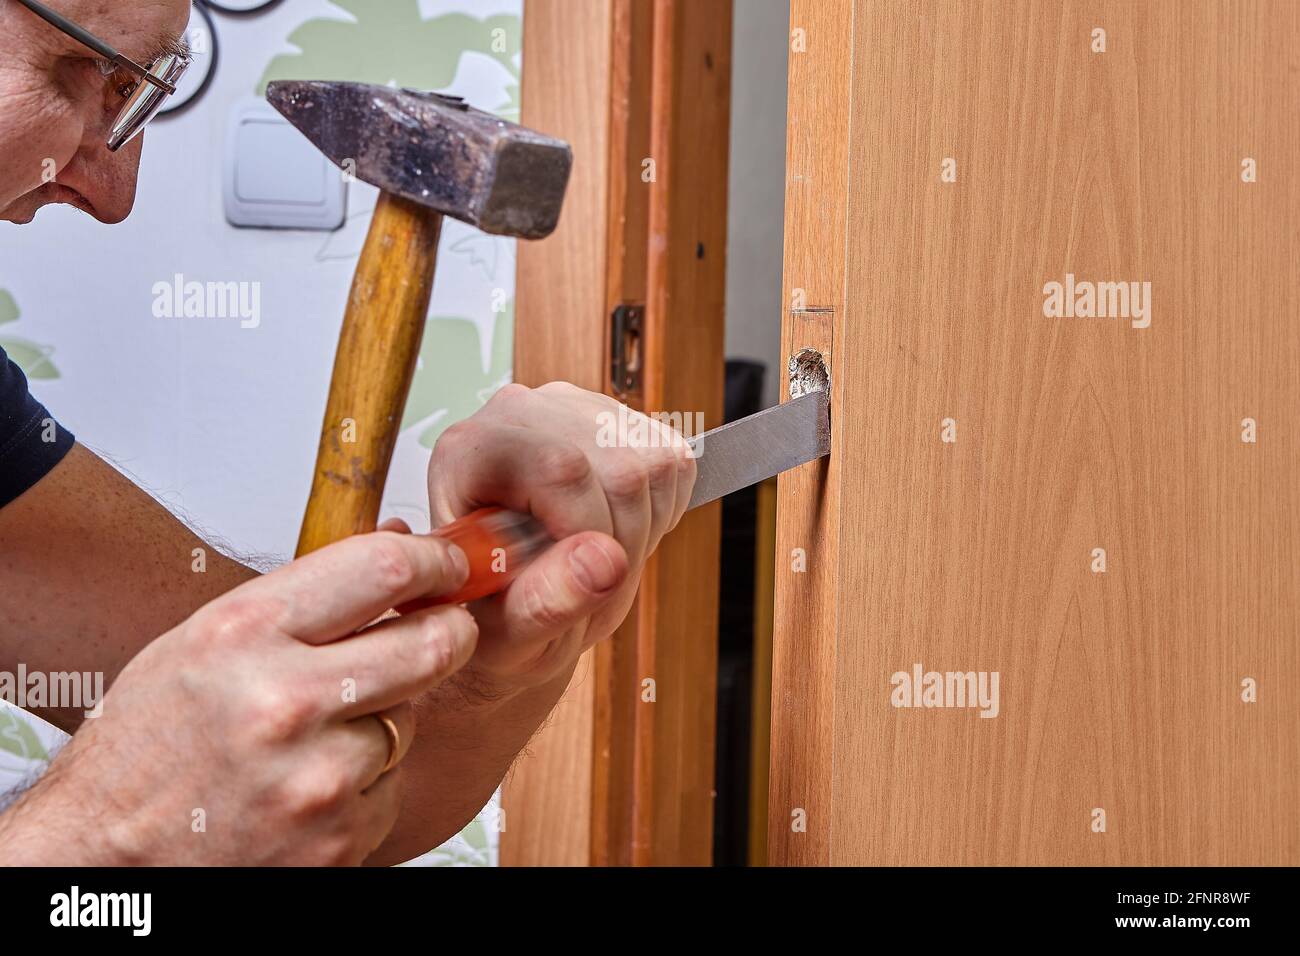 DIY installation of latch in door, groove is cut out with chisel for lock plate. Stock Photo